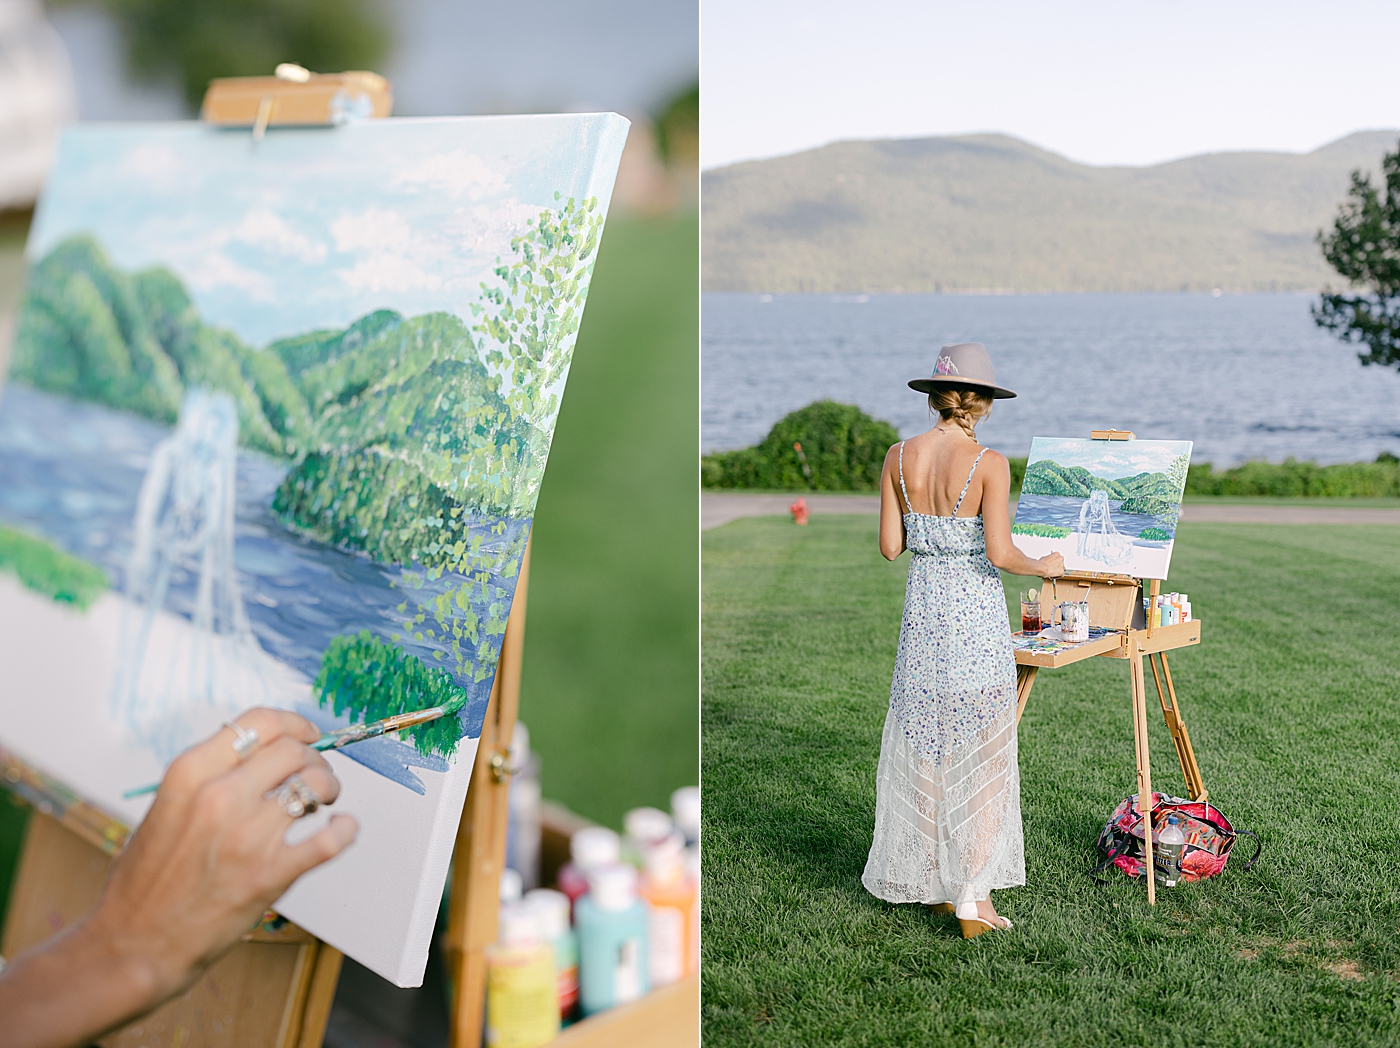 Double image details of a wedding painter painting the venue | Image by Hope Helmuth Photography